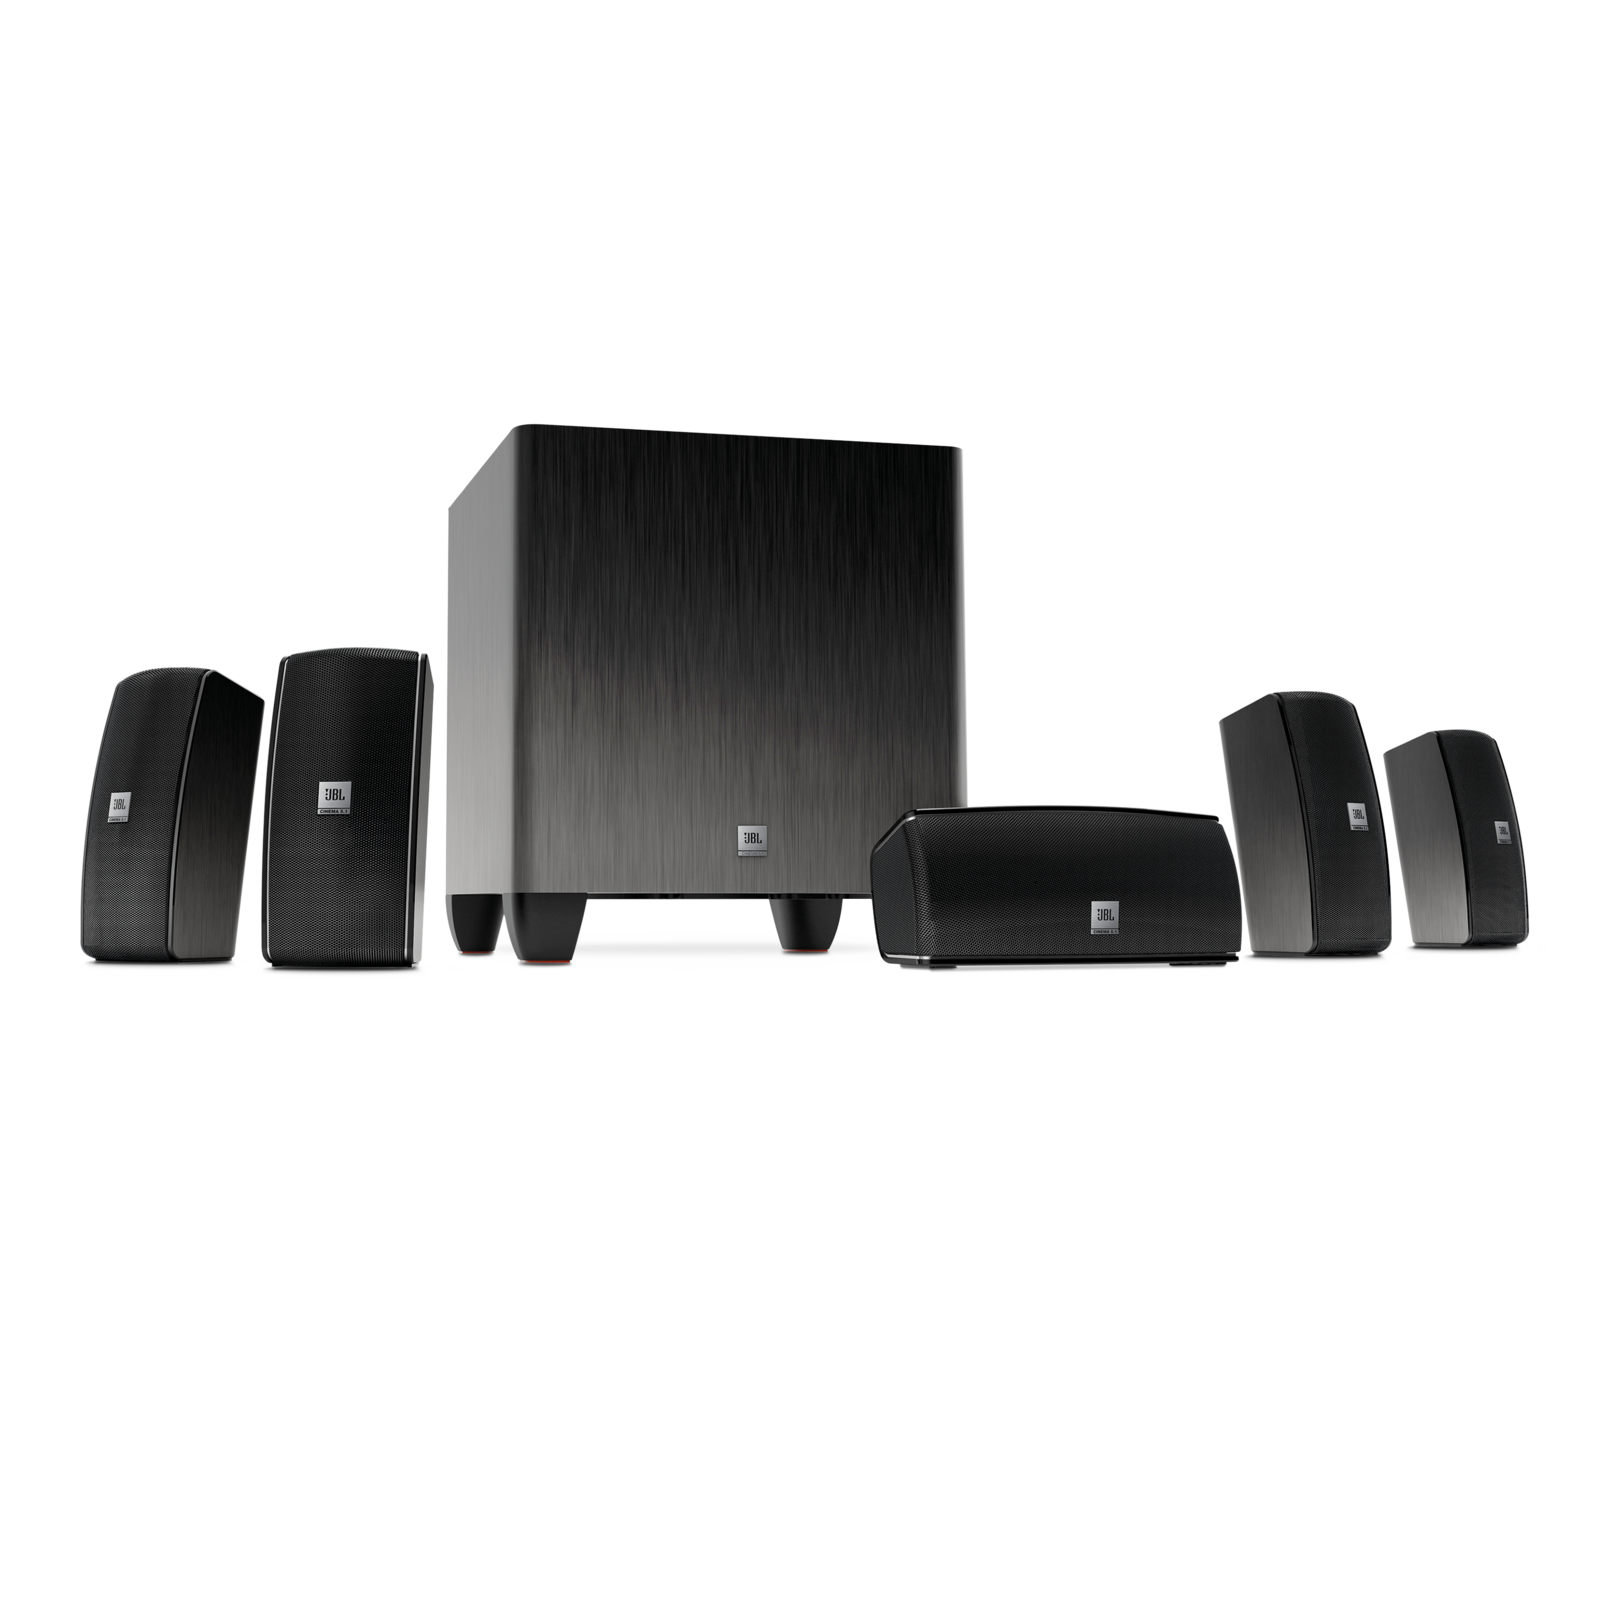 jbl music system home theater